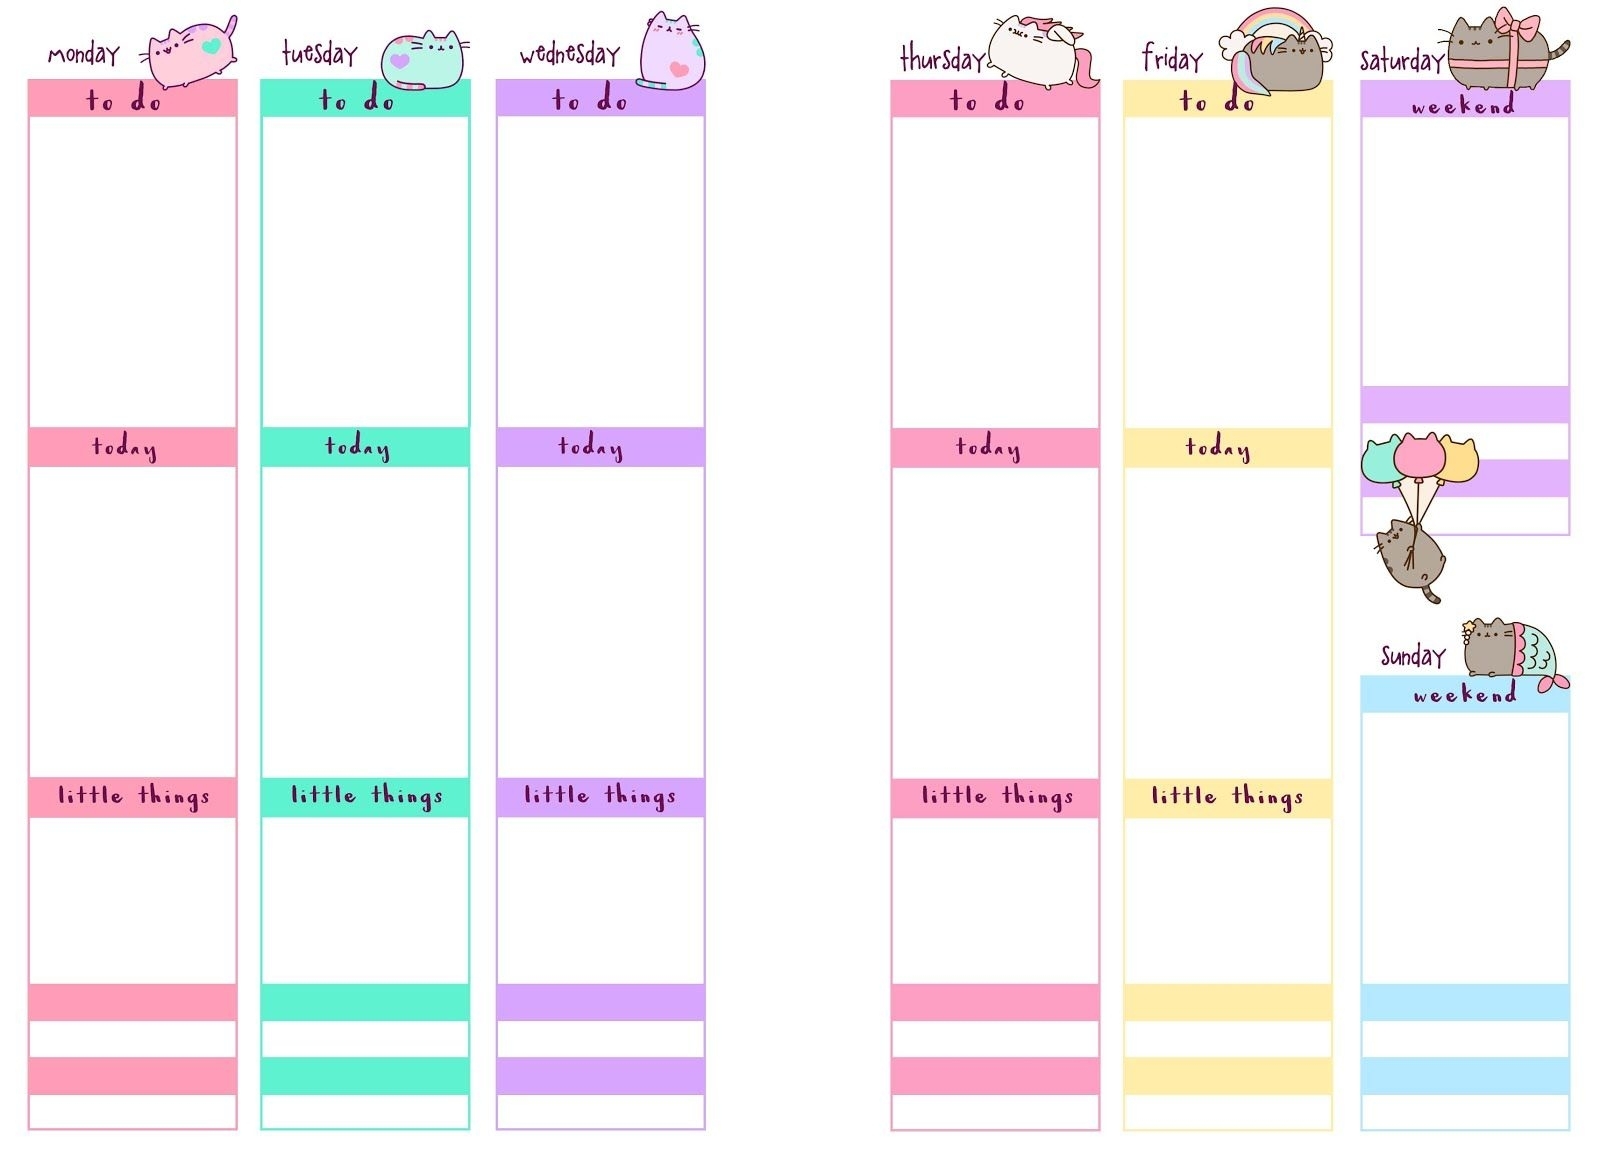 Pb And J Studio: Free Printable Planner Inserts | Pusheen Inspired intended for Sanrio A6 Monthly Planner Print